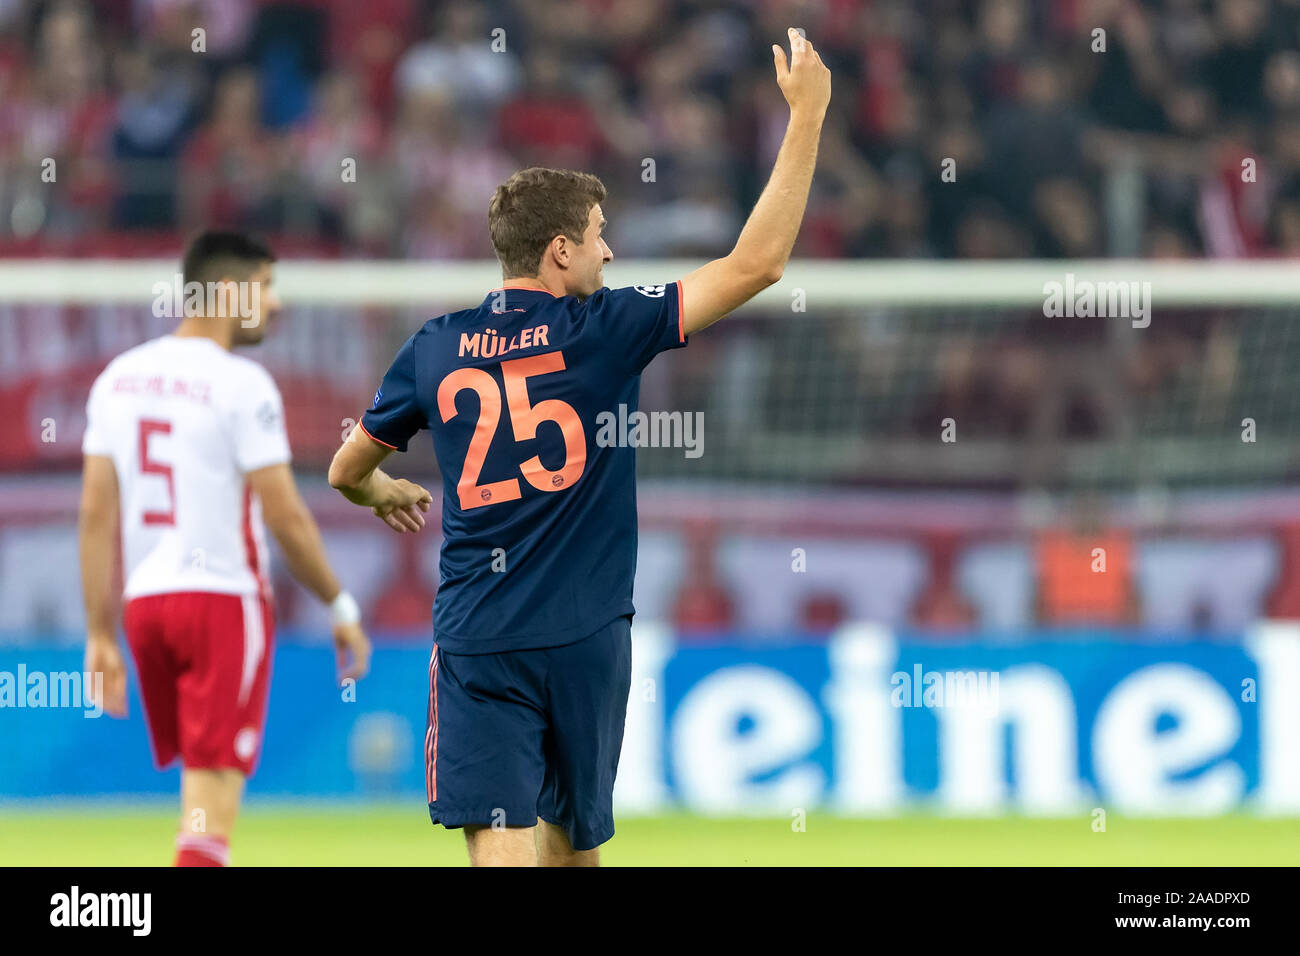 Piraeus, Greece - October 22, 2019: Player of Bayern Thomas Muller in action during the UEFA Champions League game between Olympiacos vs Bayern at Geo Stock Photo